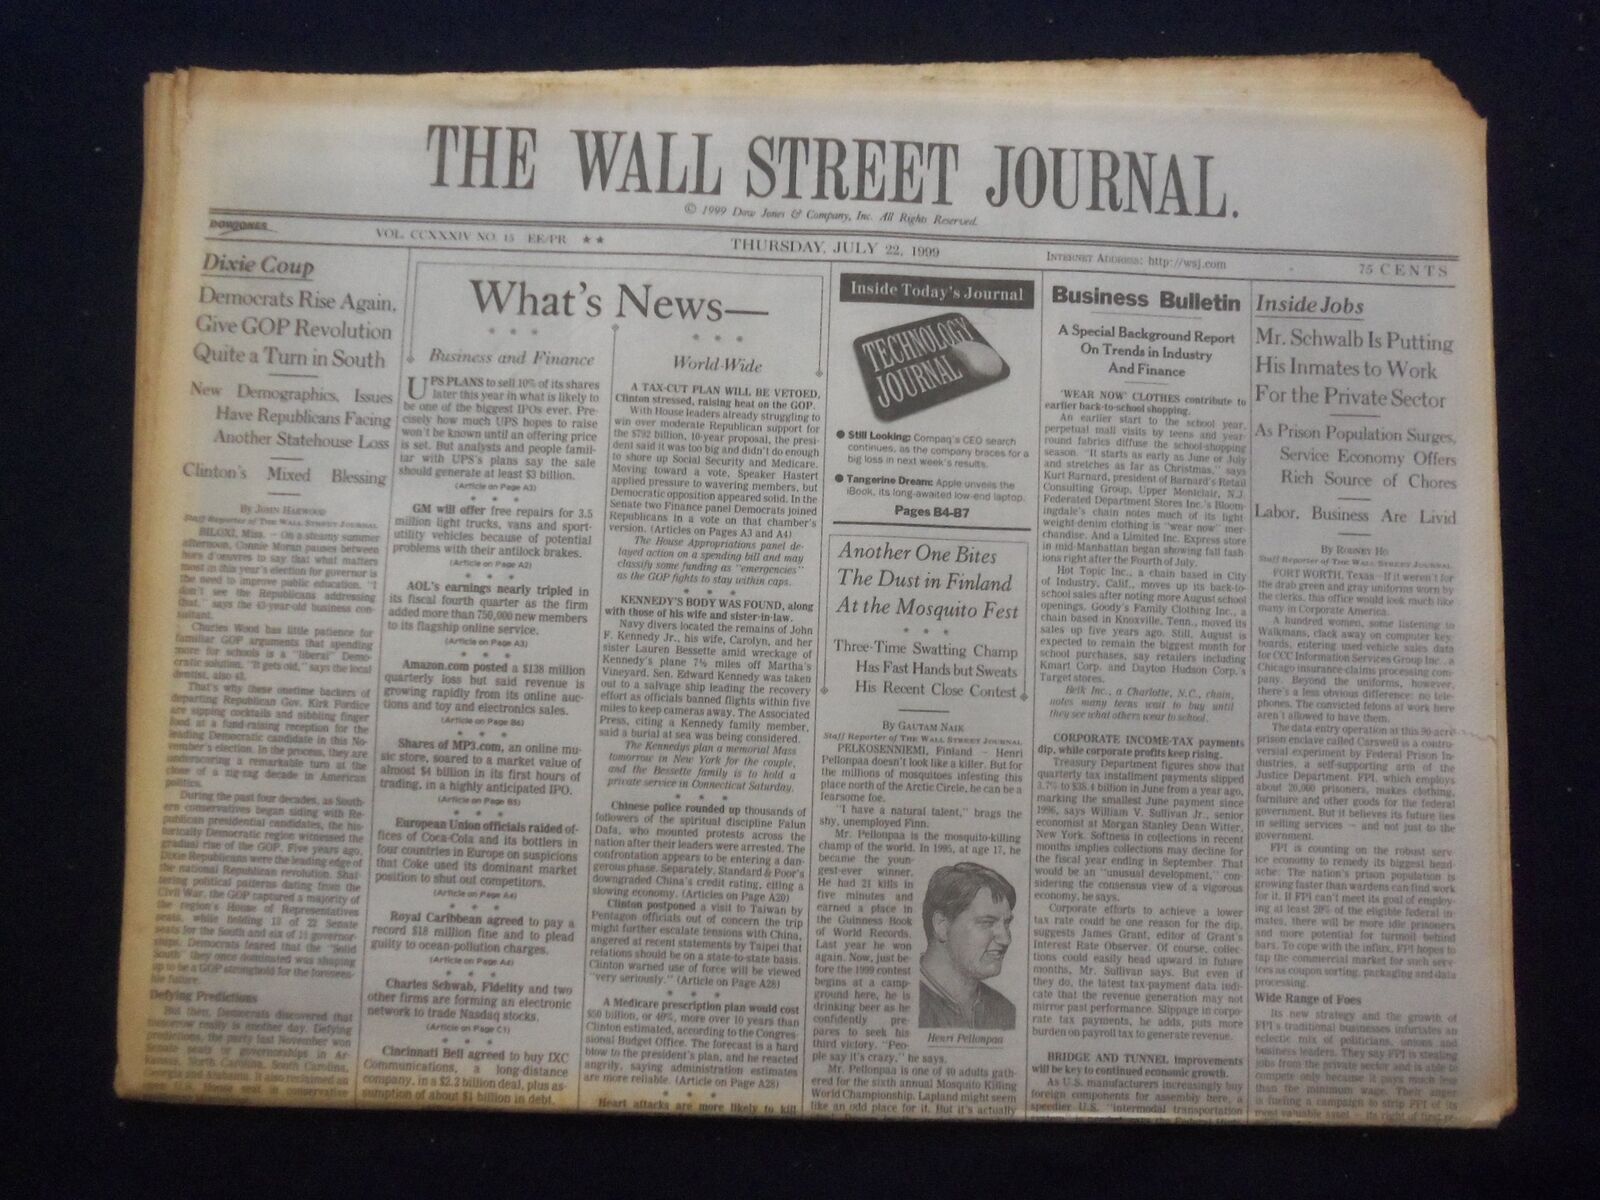 1999 JULY 22 THE WALL STREET JOURNAL-DEMOCRATS RISE AGAIN, TURN IN SOUTH- WJ 342